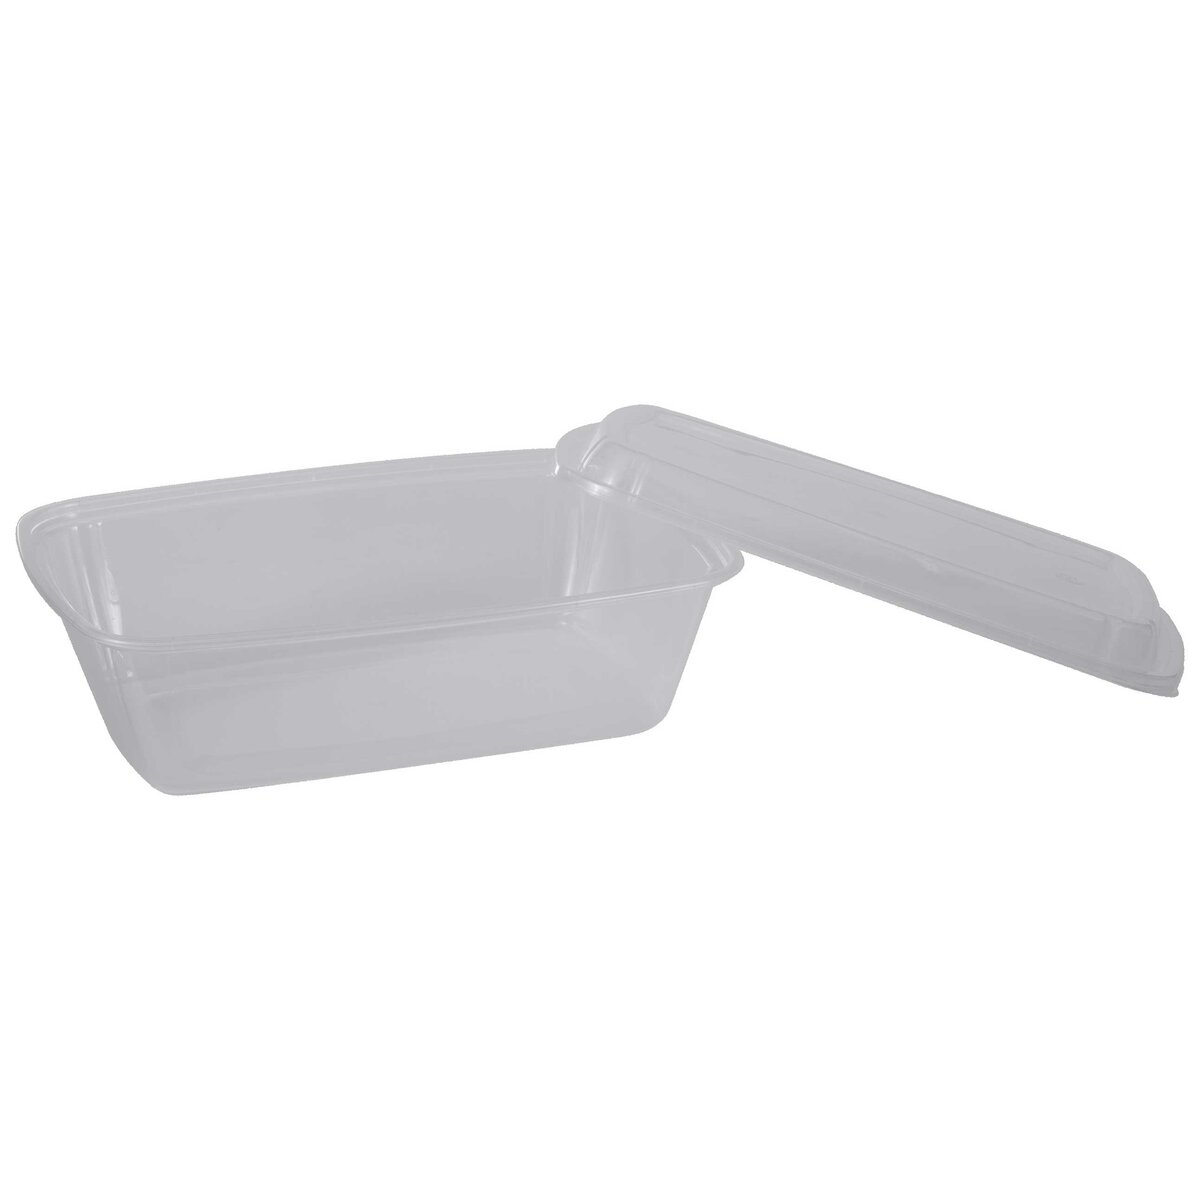 Cafe Express Plastic Containers & Lids, 30 Pack